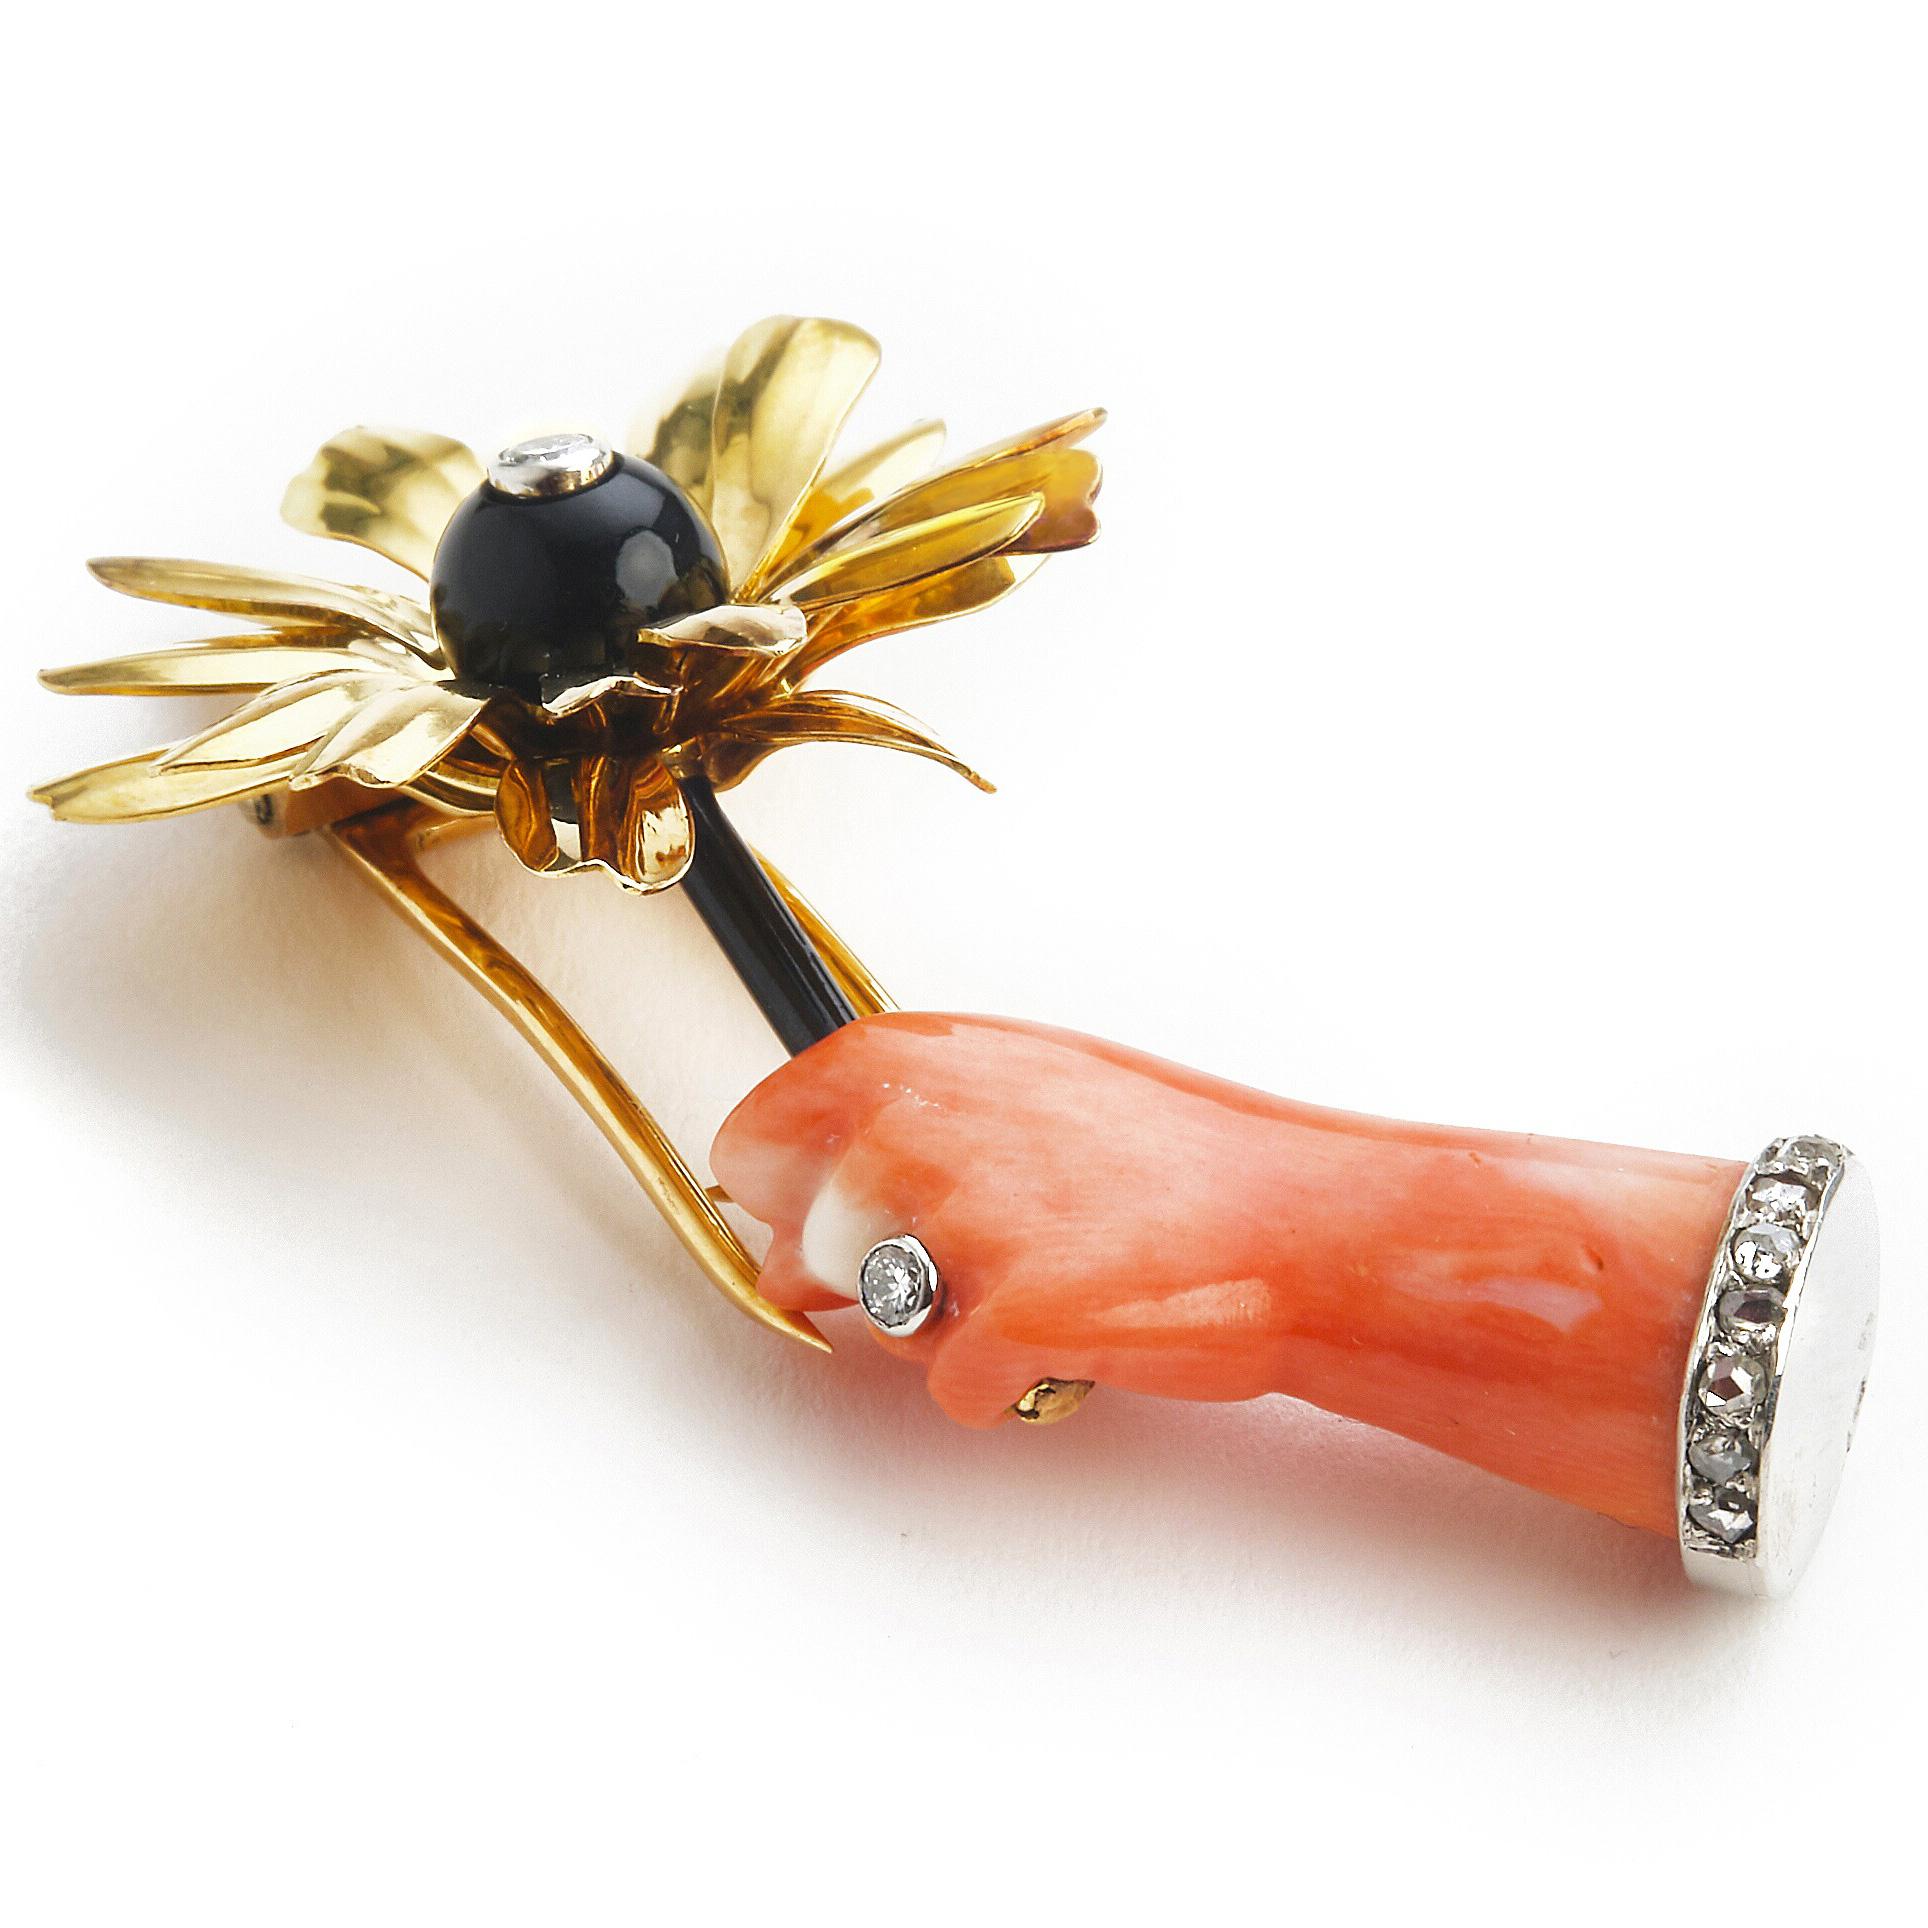 Cartier Hand and Dandelion Flower Pin Brooch, ca. 1937

A delightful piece, where a corallum rubrium hand, wearing a diamond bracelet and an exquisite diamond ring is holding an entremblant dandelion flower made of gold, diamond and black